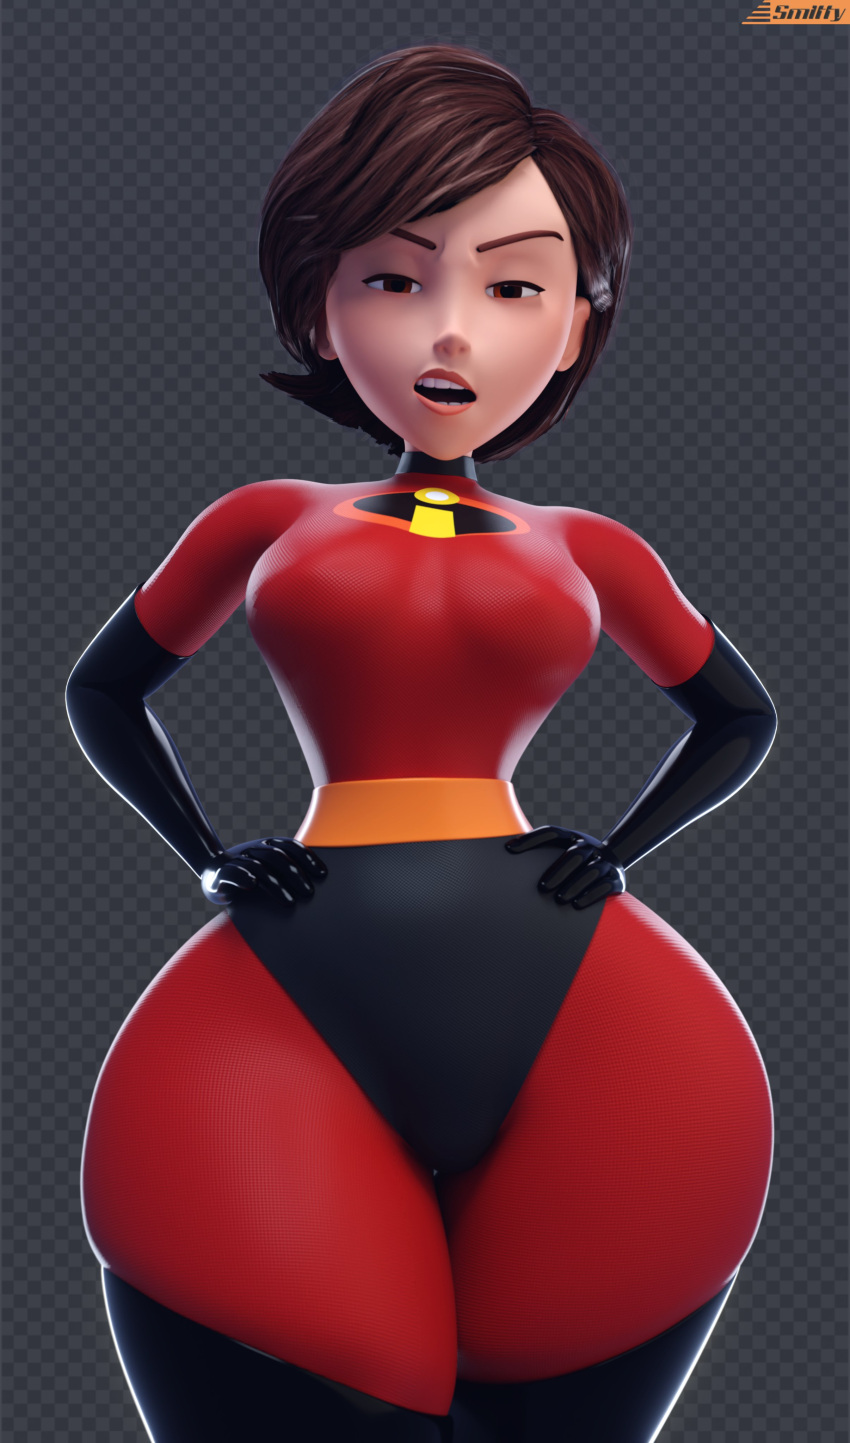 1girl 1girl 1girl 3d 3d_(artwork) 3d_model alternate_version_available angry_face ass athletic athletic_female big_ass big_breasts big_breasts big_breasts big_thighs bottom_heavy breasts breasts brown_eyes brown_hair bubble_ass bubble_butt bust checkered_background child_bearing_hips cleavage curvaceous curvy curvy_figure disney elastigirl female_focus fit fit_female hair hands_on_hips hartman_hips hazel_eyes helen_parr hero heroine hips hourglass_figure huge_ass huge_breasts human insanely_hot large_ass legs light-skinned_female light_skin lips looking_at_viewer mature mature_female milf milf pawg pixar pixar_mom round_ass round_butt sexy sexy_ass sexy_body sexy_breasts short_hair slim_waist smelly_ass smitty34 solo_focus superhero superheroine the_incredibles the_incredibles_2 thick thick_hips thick_legs thick_thighs thighs thunder_thighs tight_clothing tight_fit top_heavy tsundere voluptuous voluptuous_female waist wide_hips